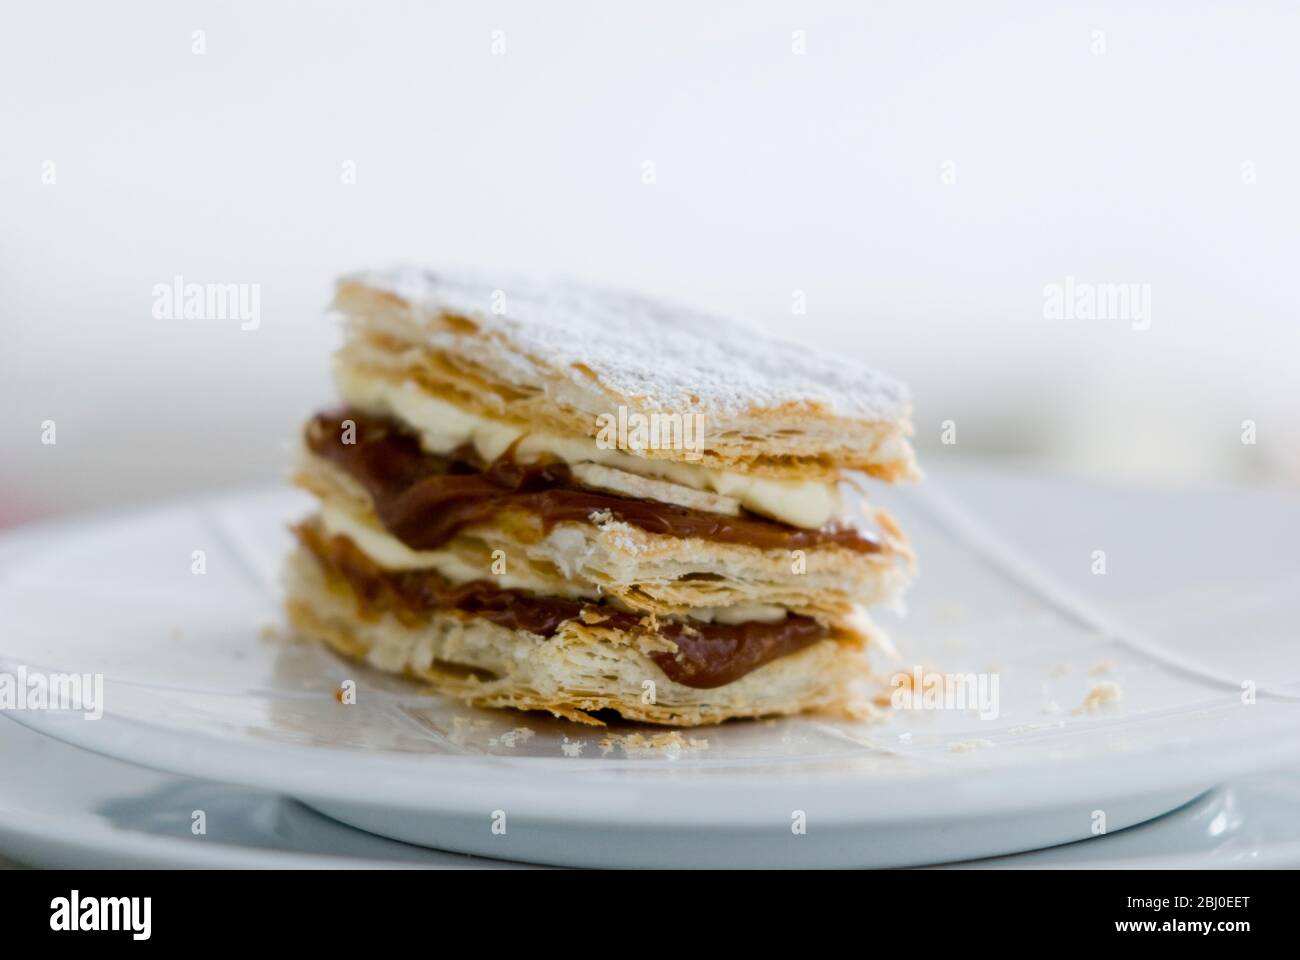 Layered mille feuilles pastry with whipped cream and dulce de leche. - Stock Photo